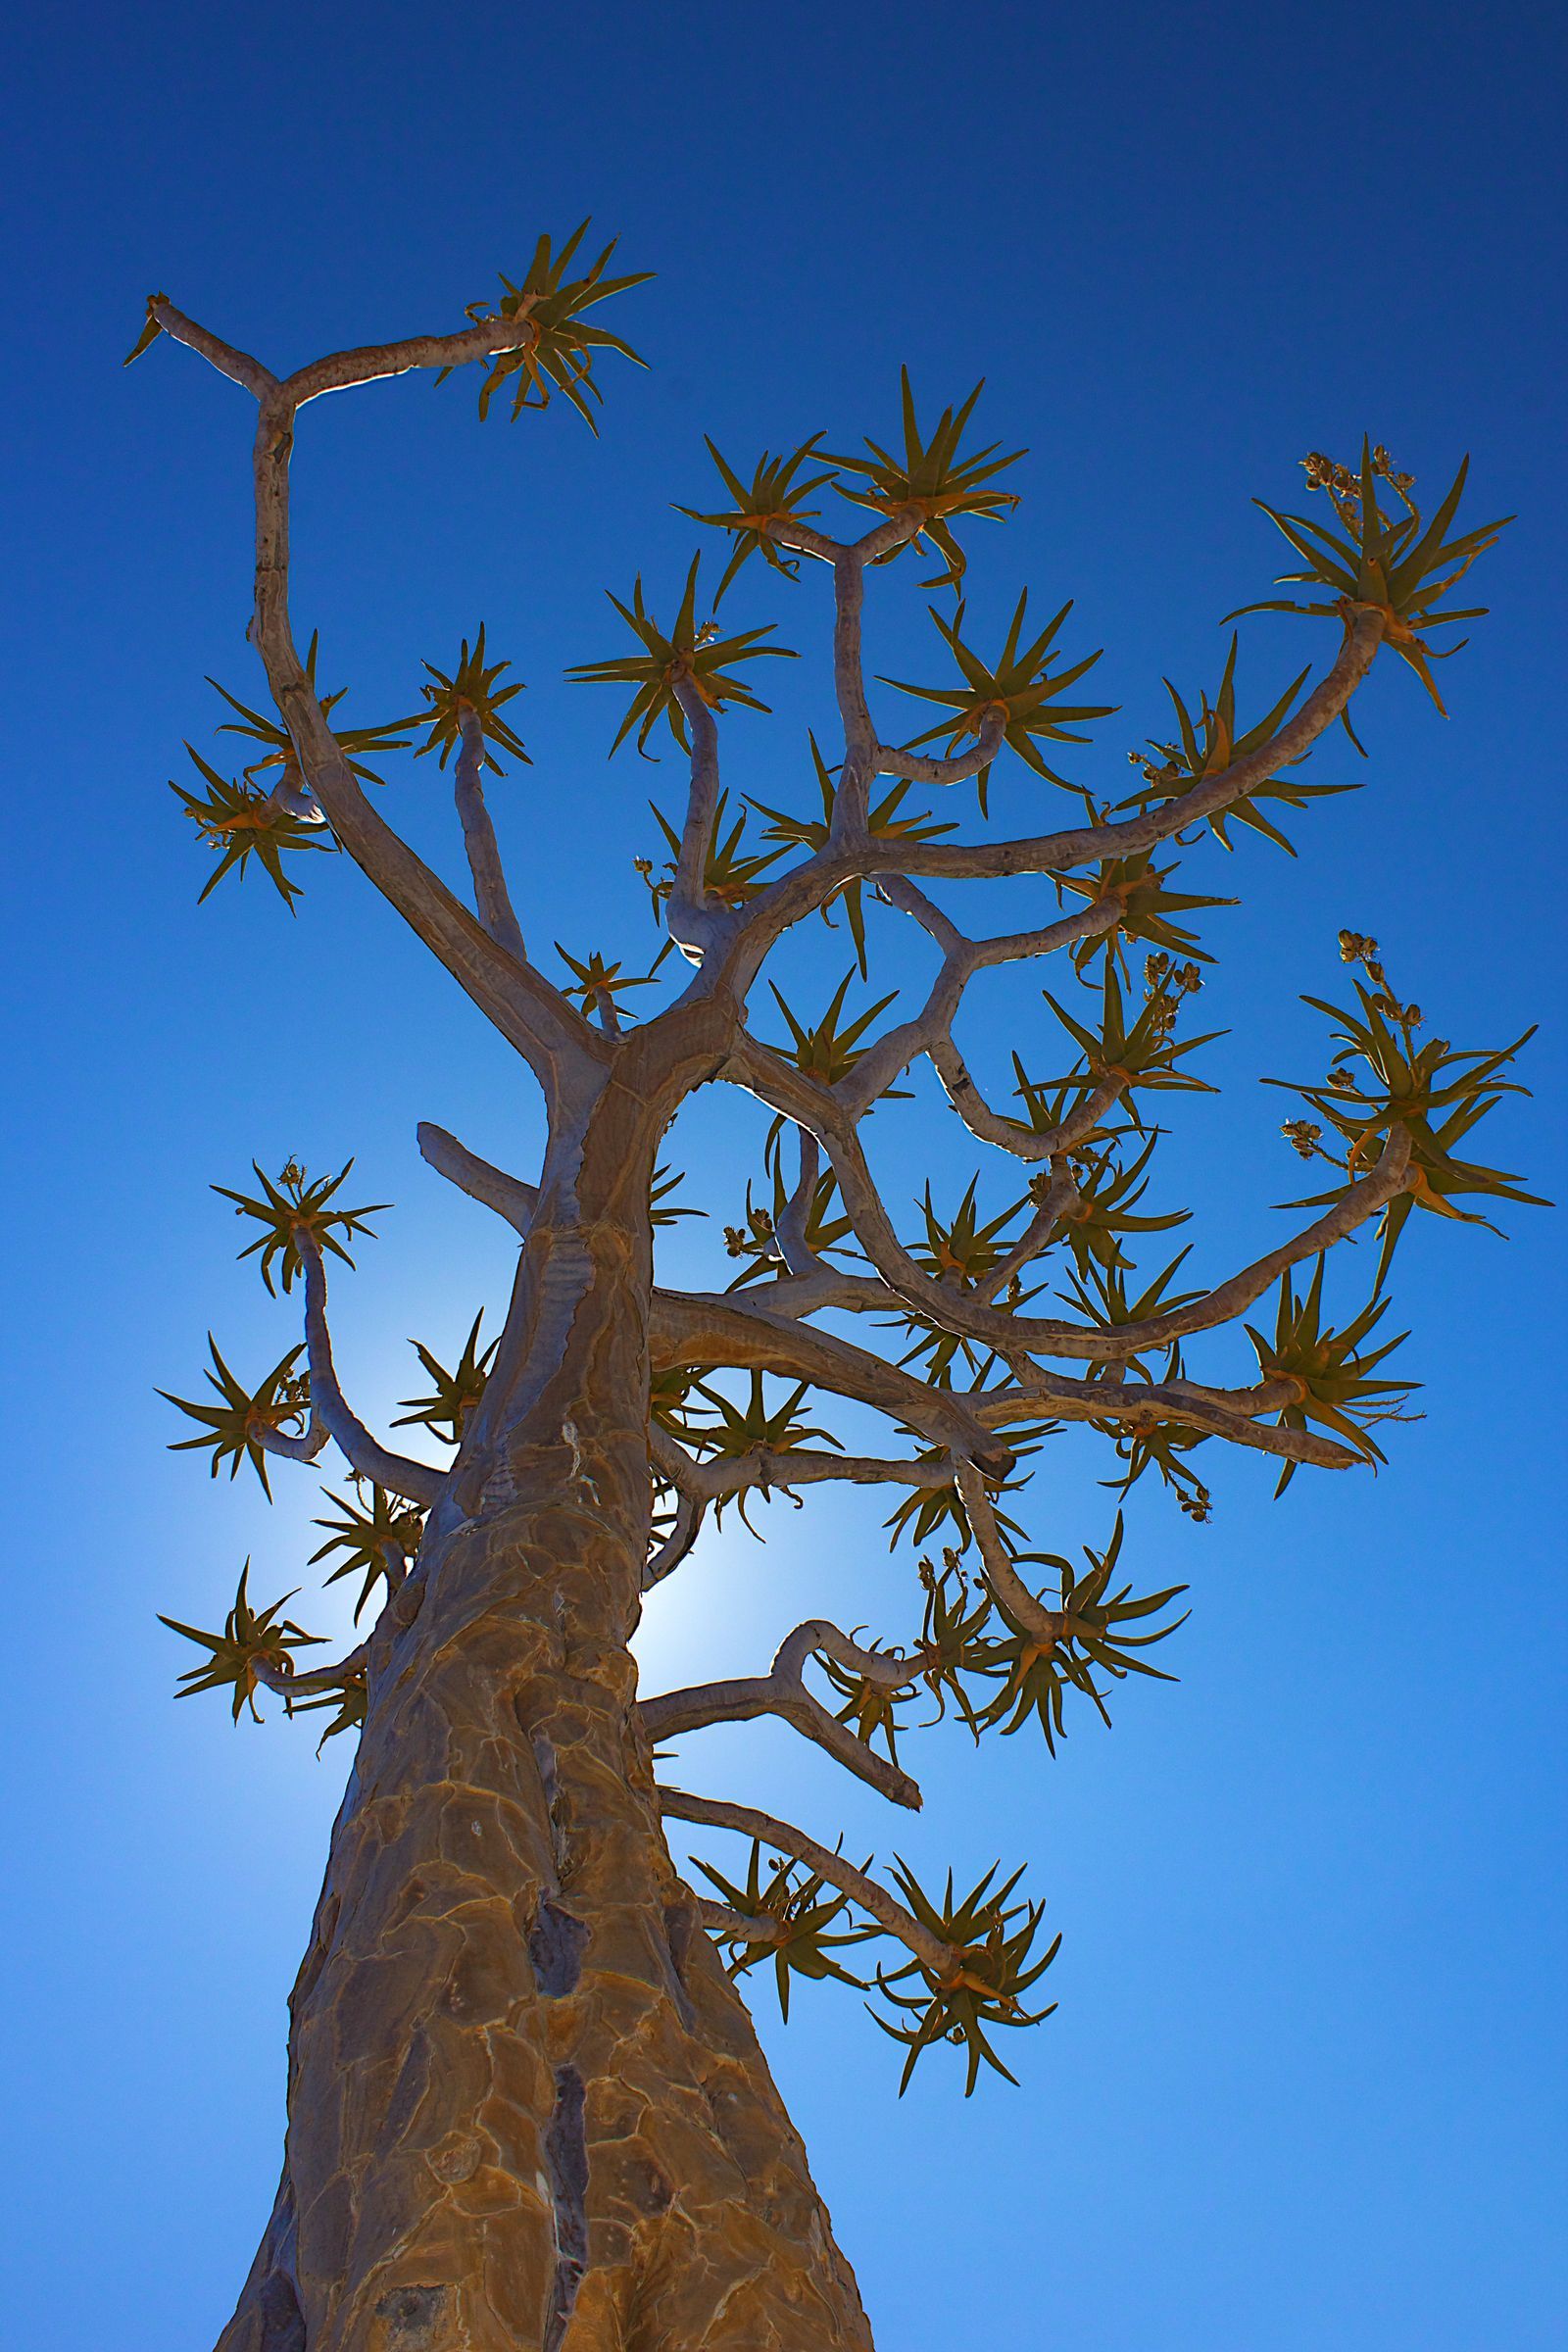 Namibia's iconic Quiver Trees are always great subjects on our photo tours